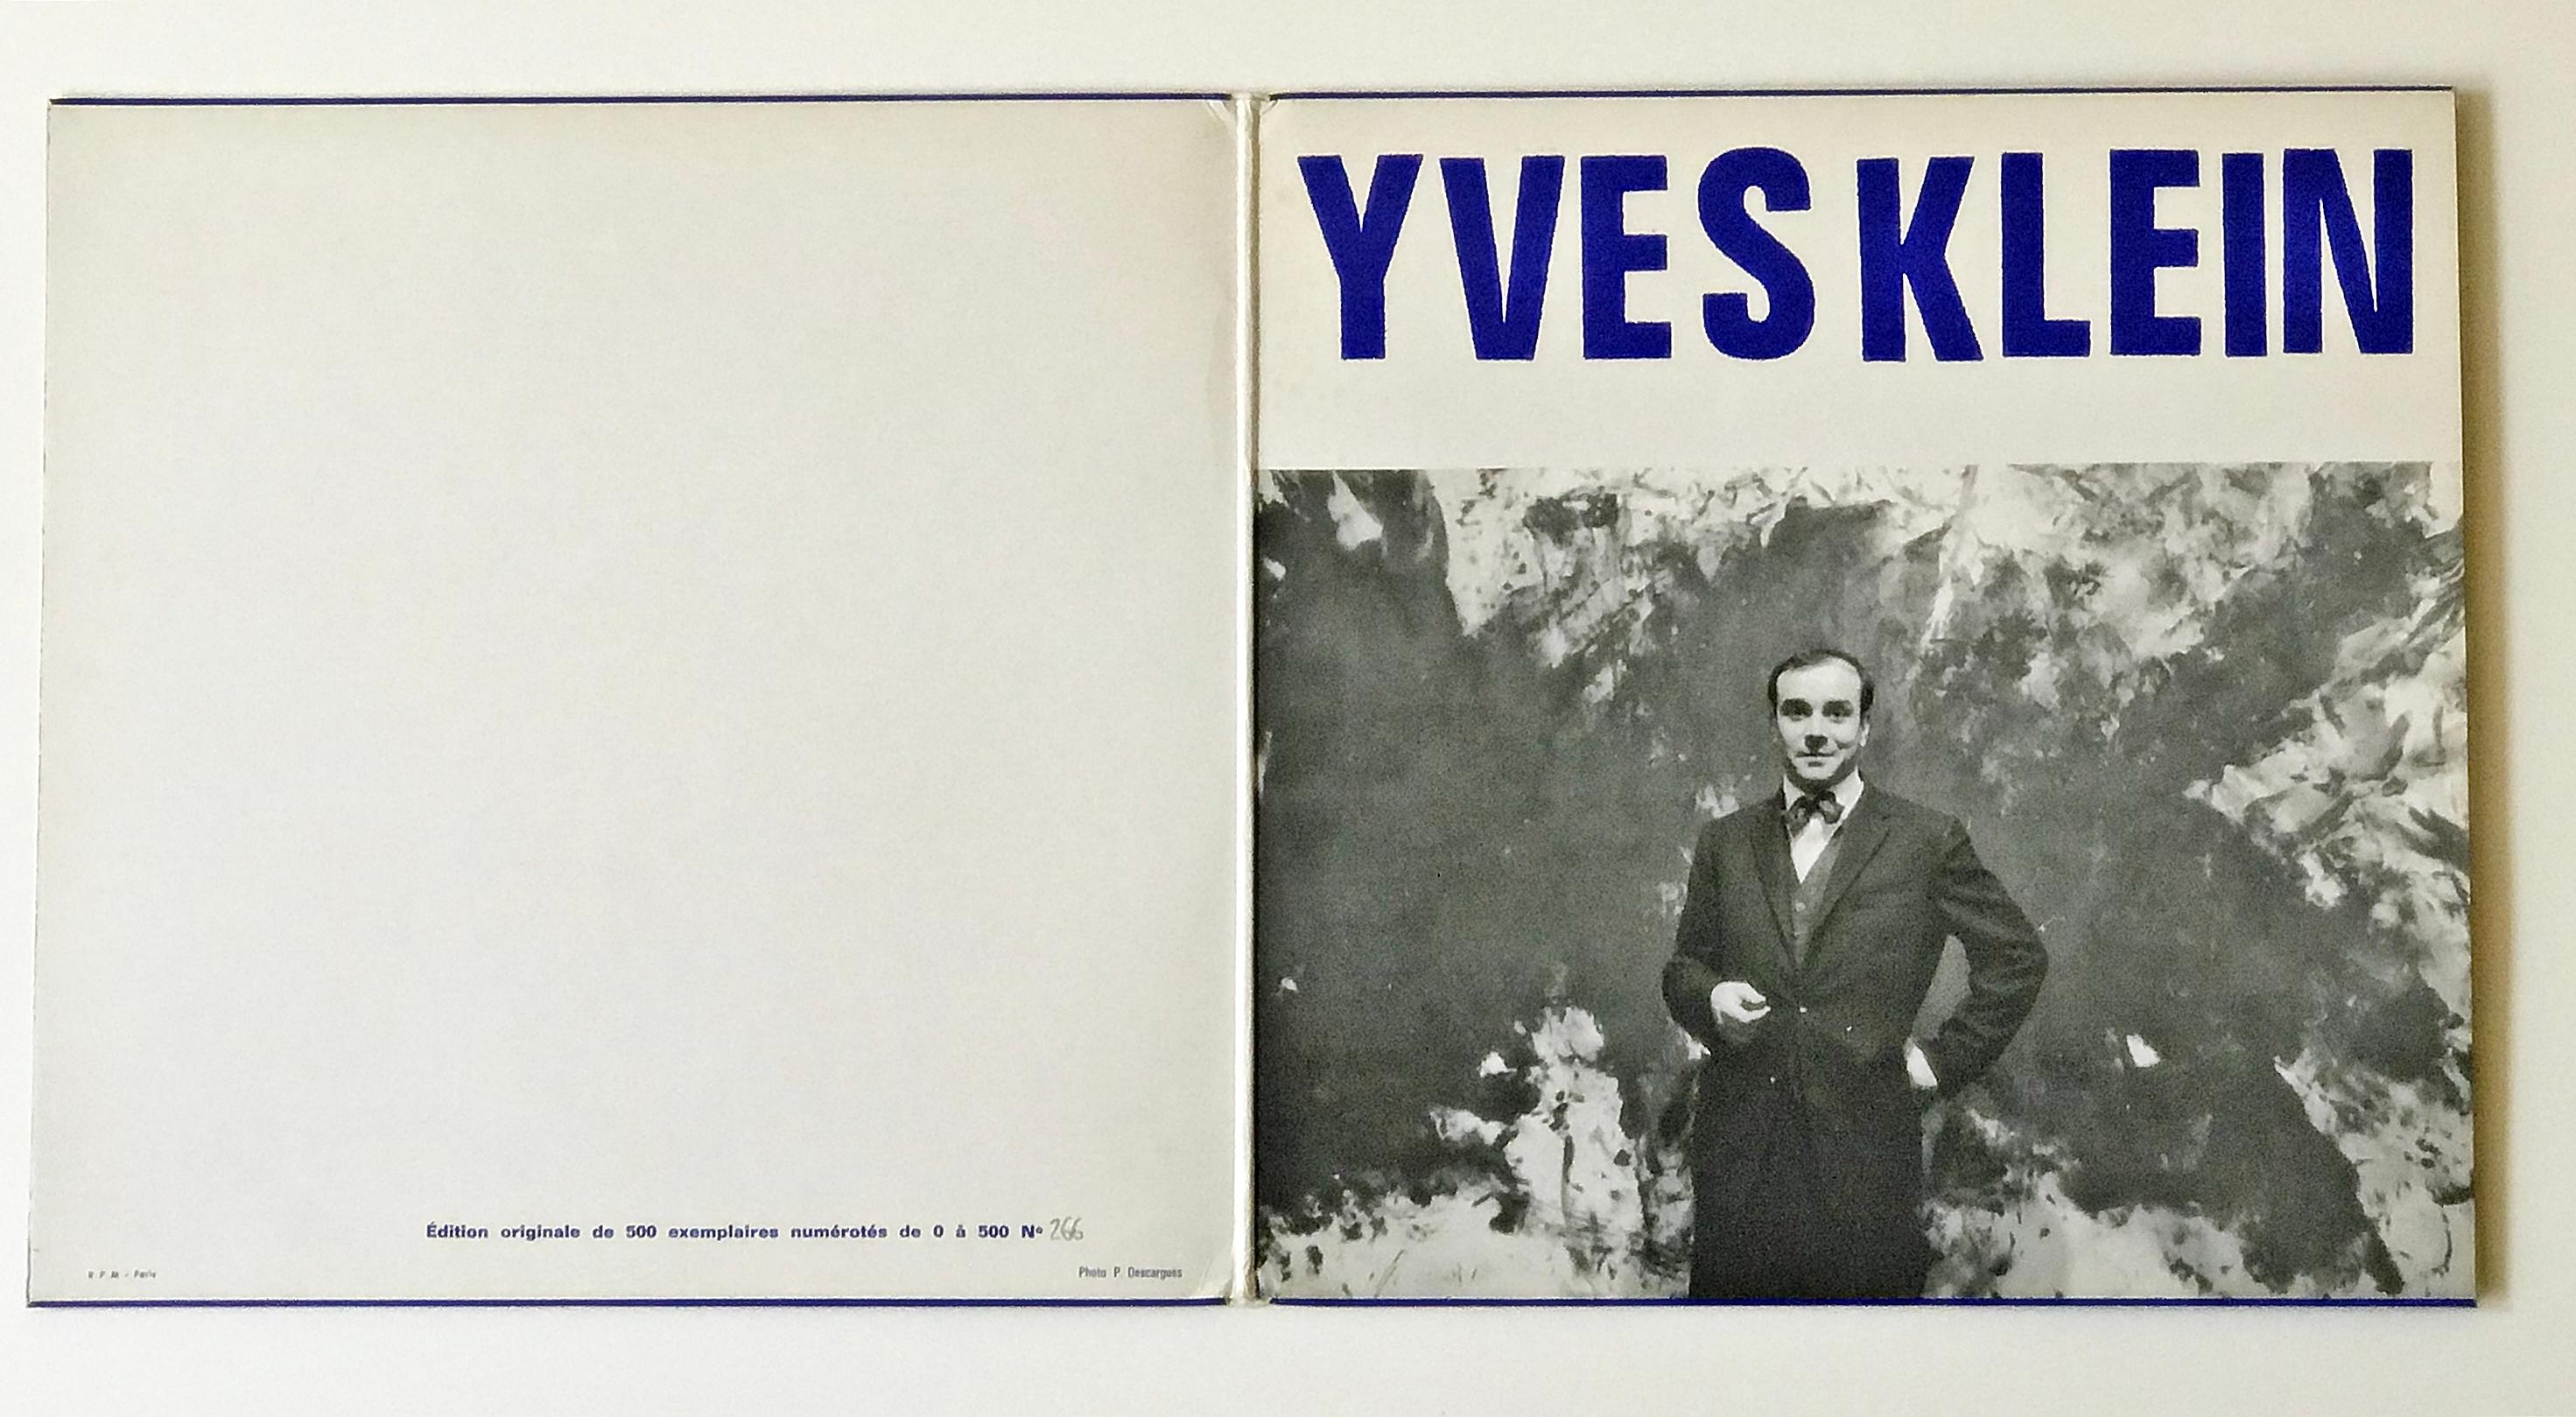 Yves Klein
La Conférence à la Sorbonne, 3 Juin, 1959, 1959-1963
Two 12-inch vinyl records held in gatefold sleeve with silkscreen cover jacket in IKB International Klein Blue Color.
12 7/10 × 12 7/10 inches
Edition of 500
Hand numbered from the